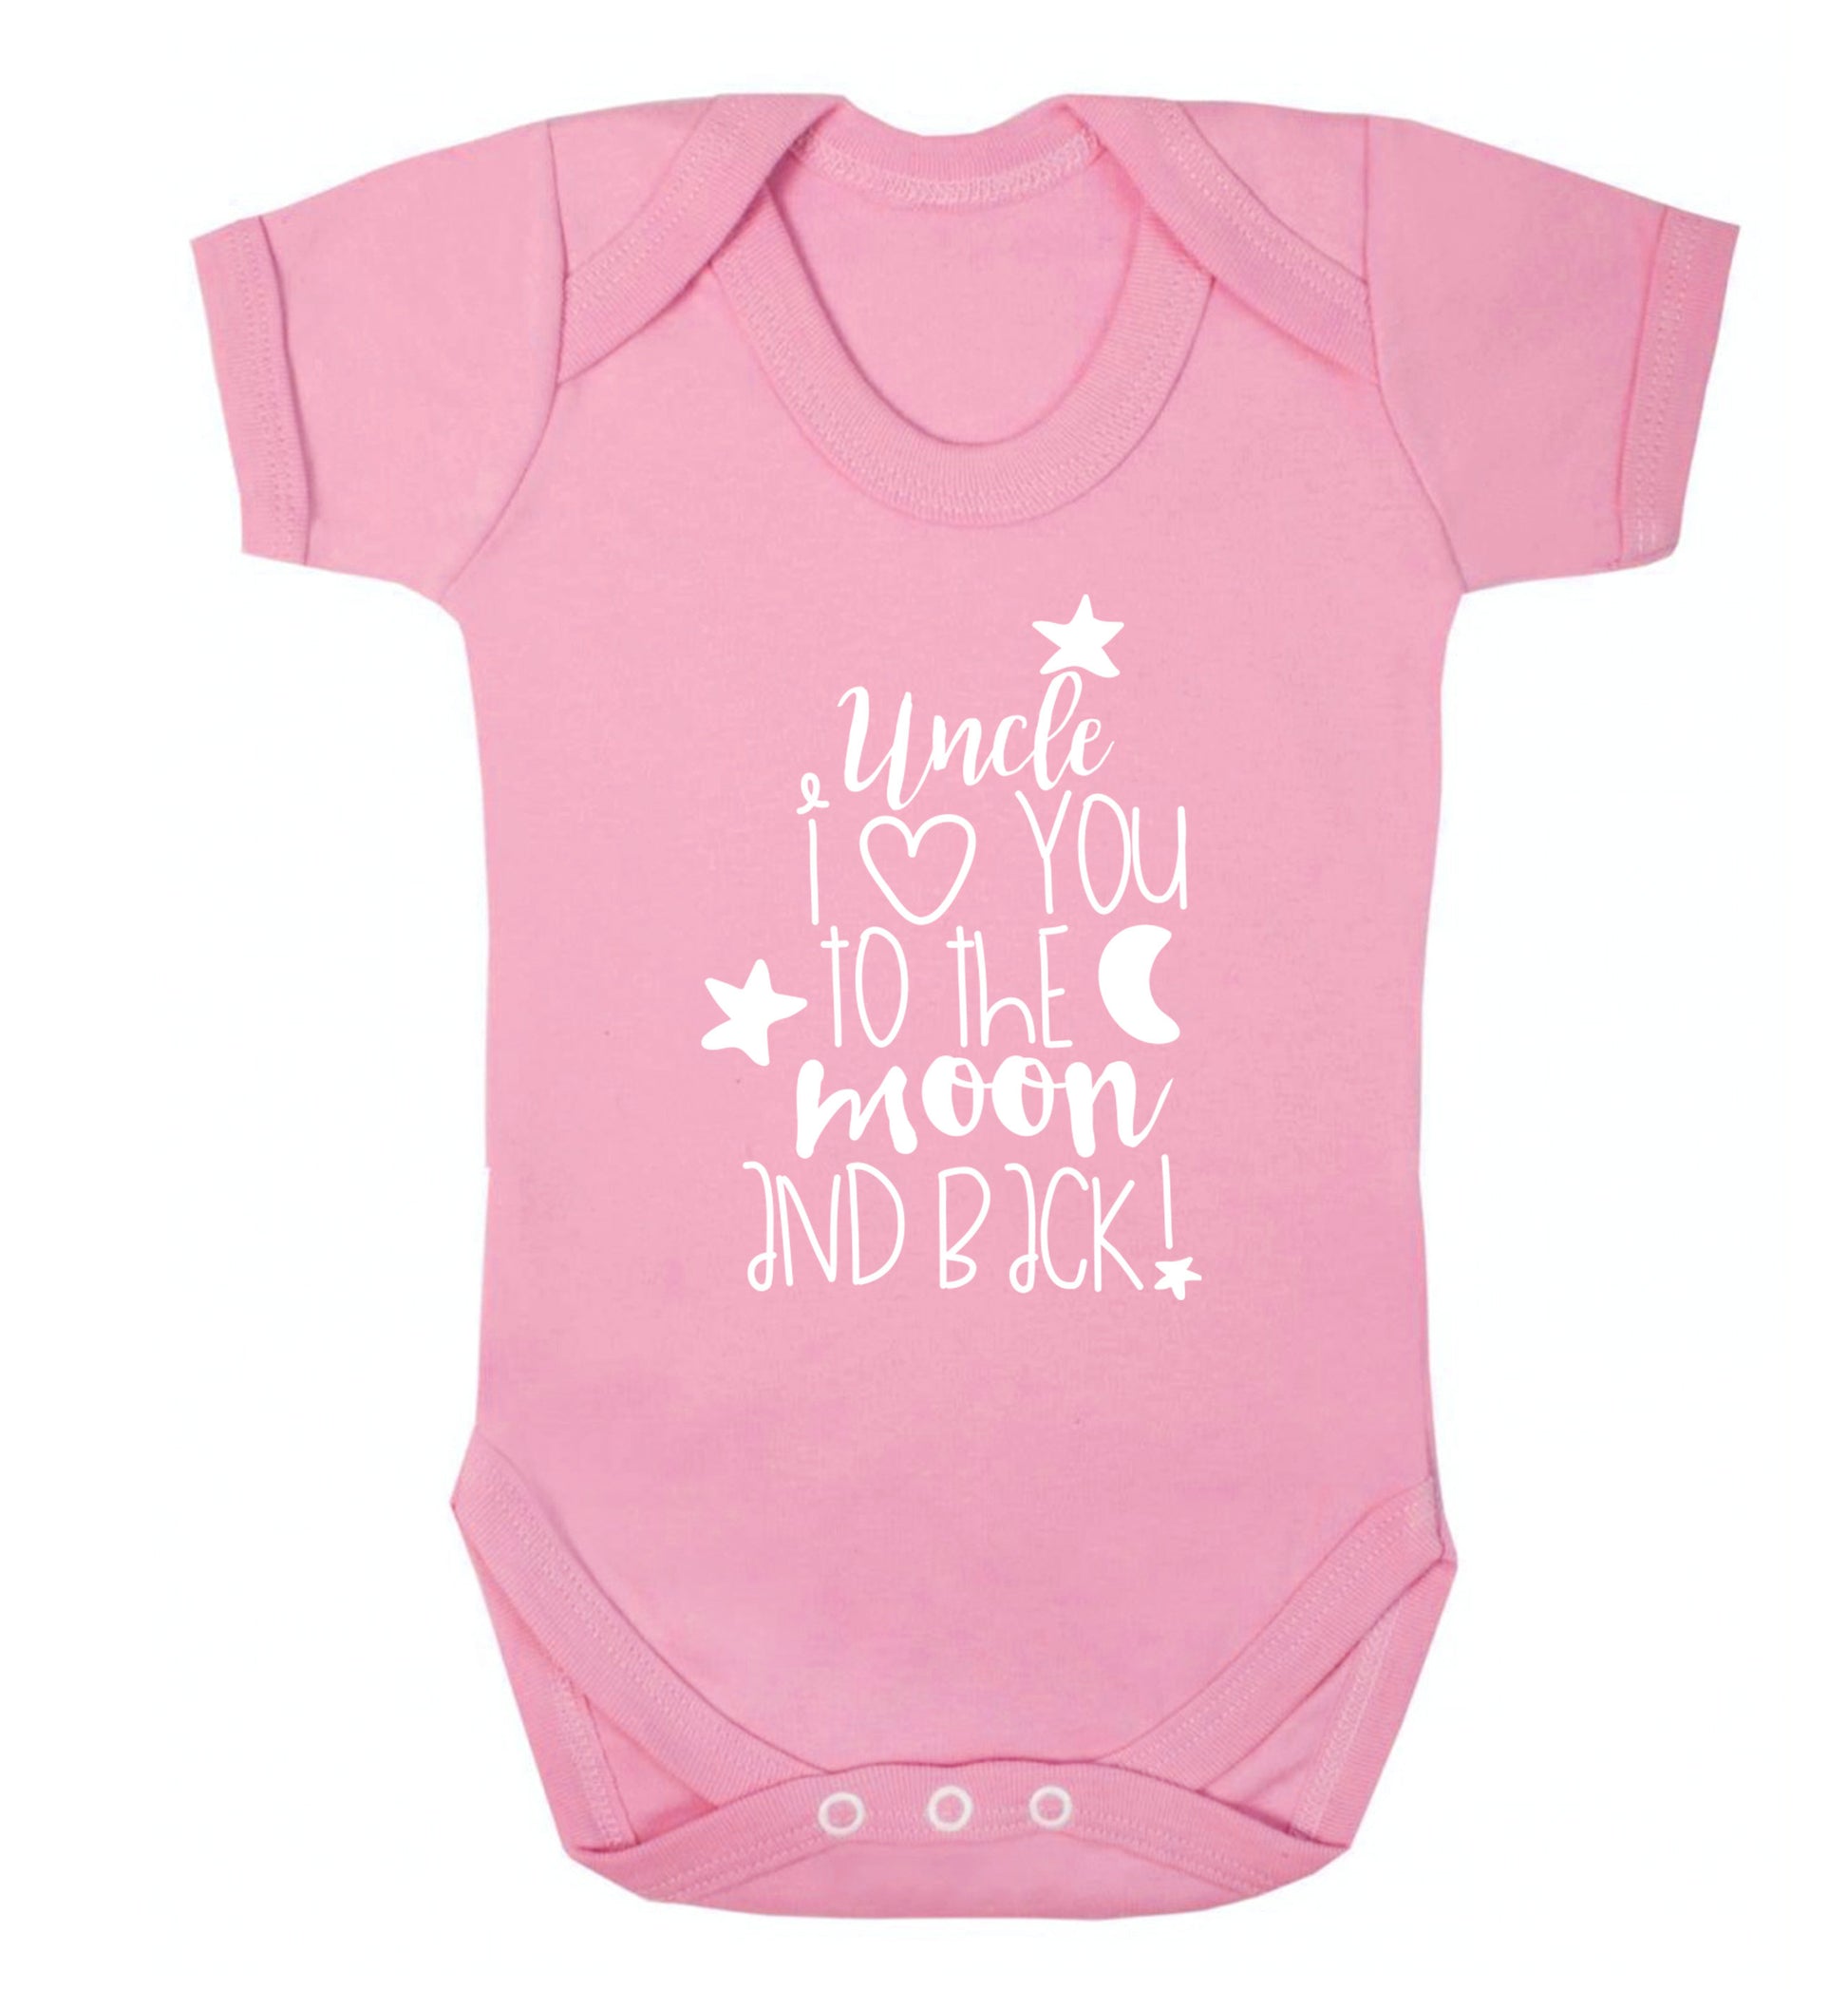 Uncle I love you to the moon and back Baby Vest pale pink 18-24 months